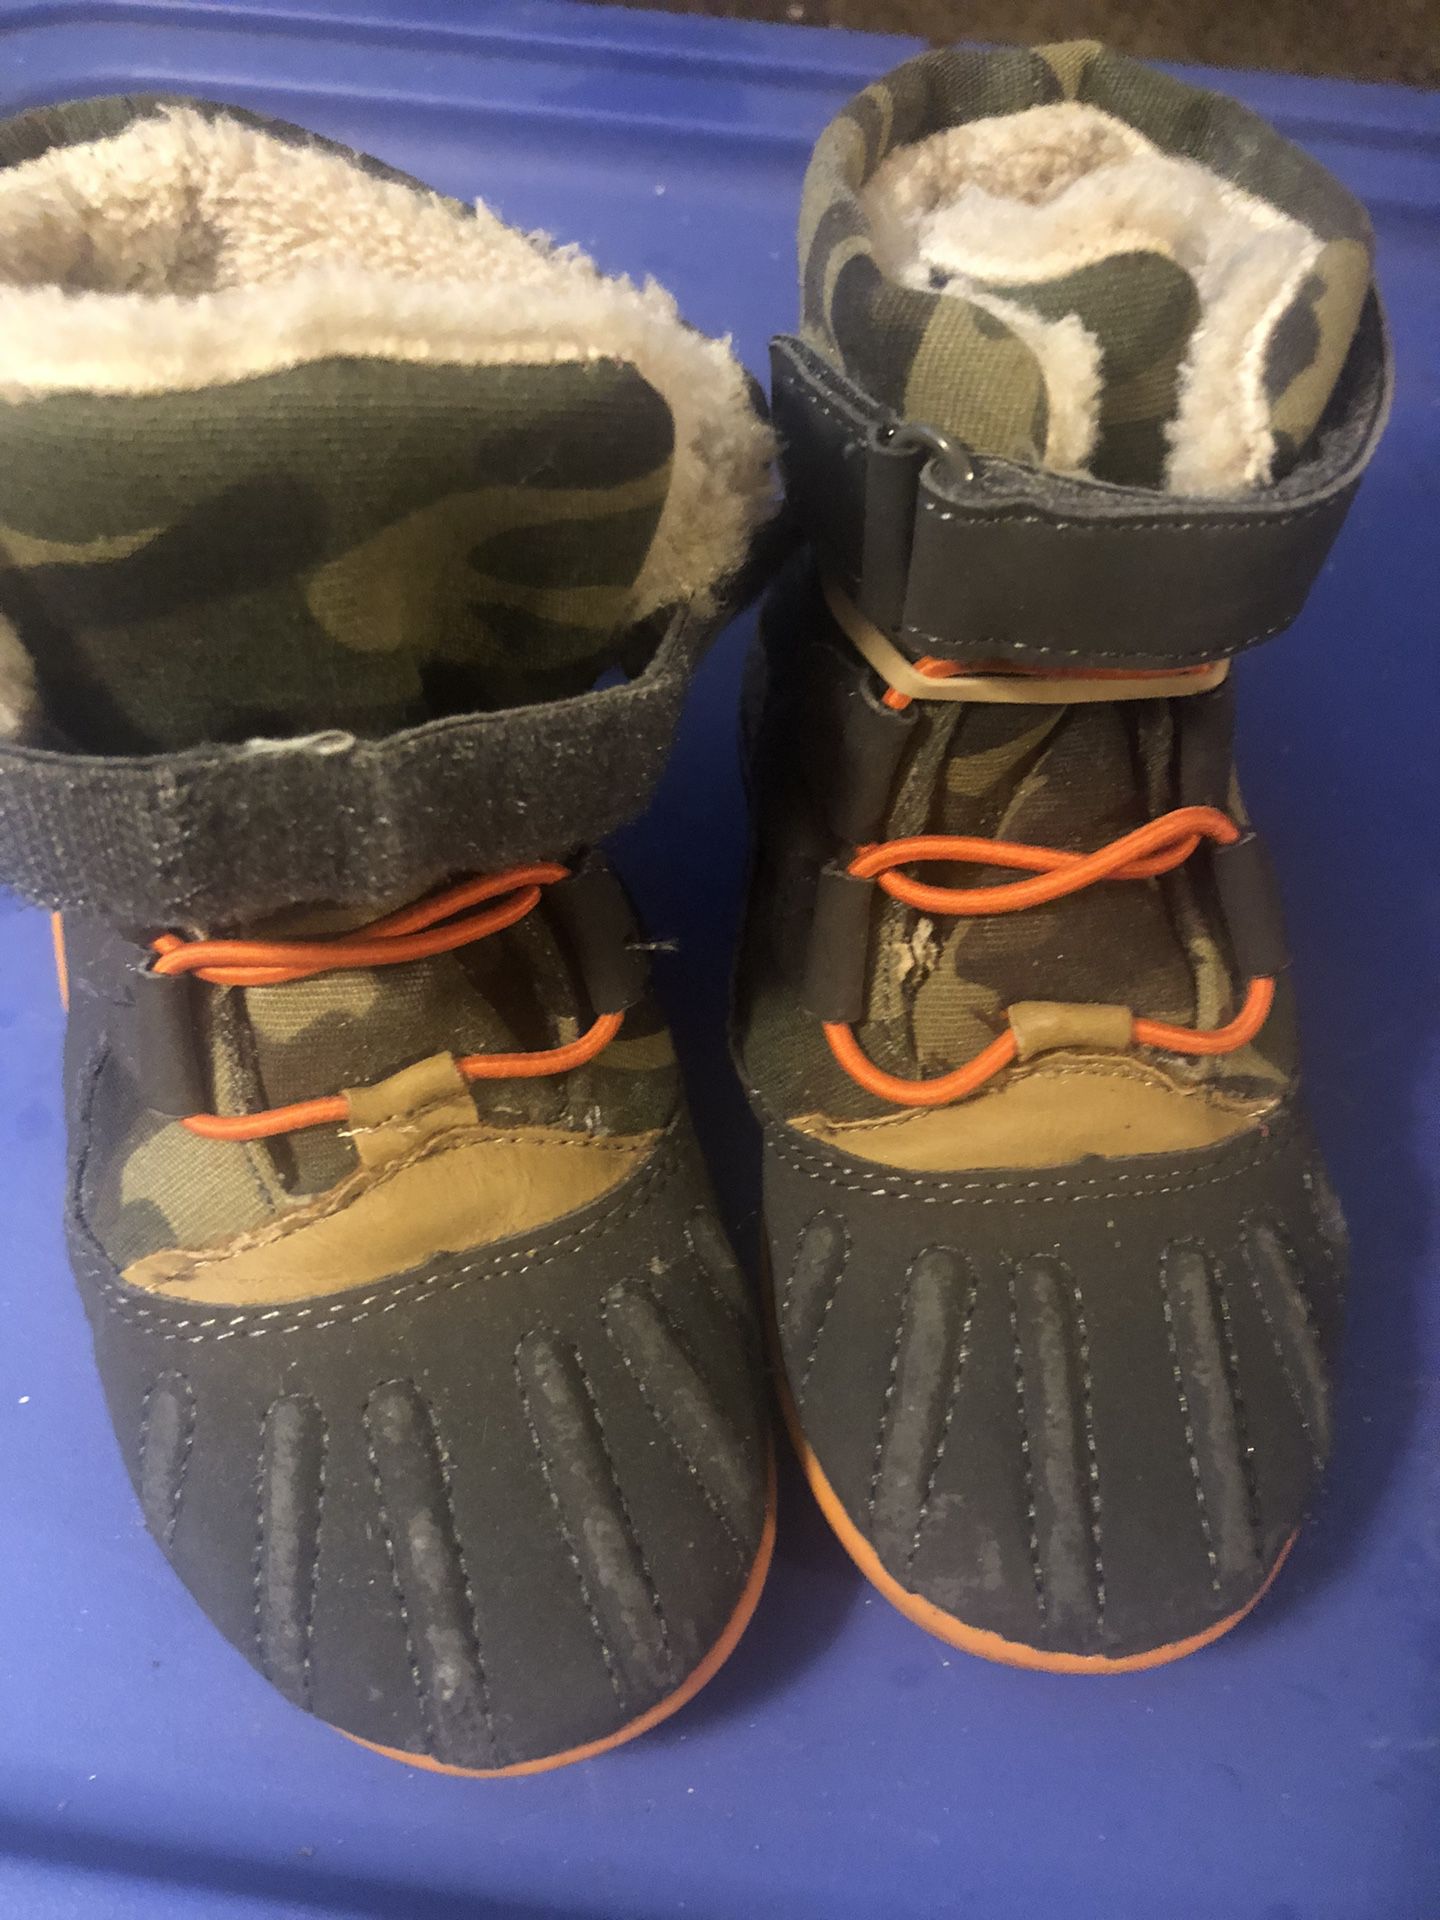 Carters Little Boys Camo Boots. Size 5C REDUCED 